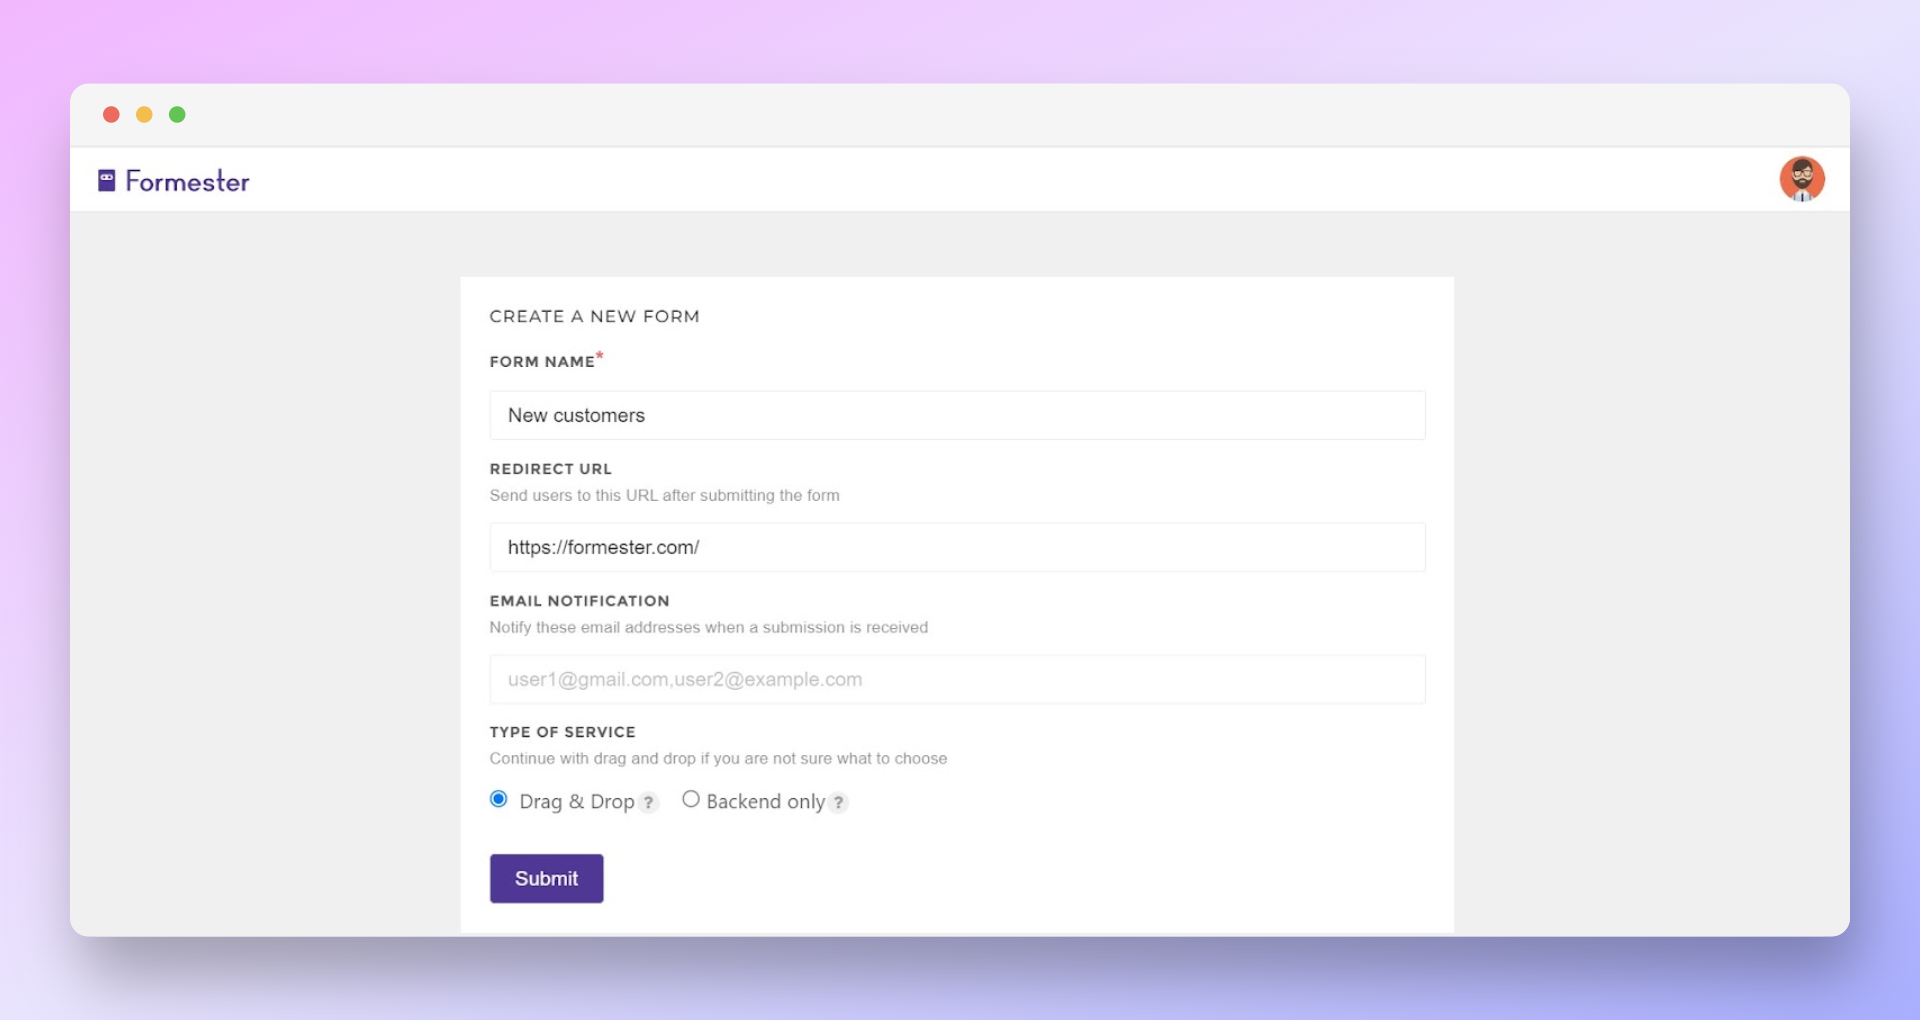 Form accepting details like form name, redirection url for creating your new form